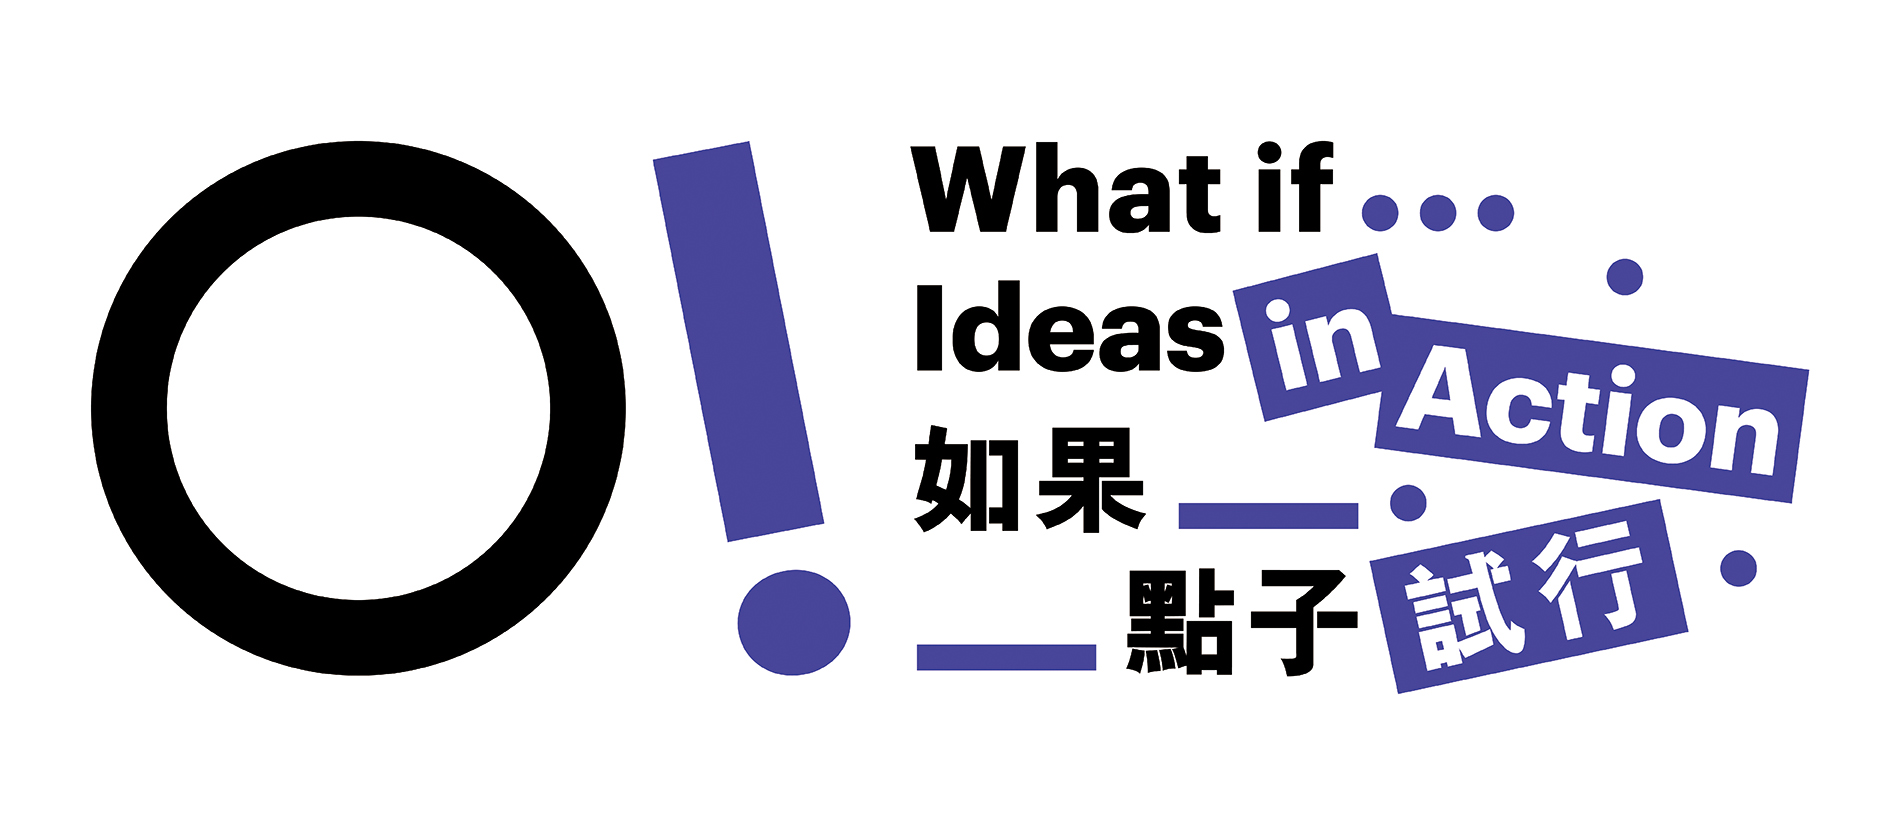 O! What if…Ideas in Action